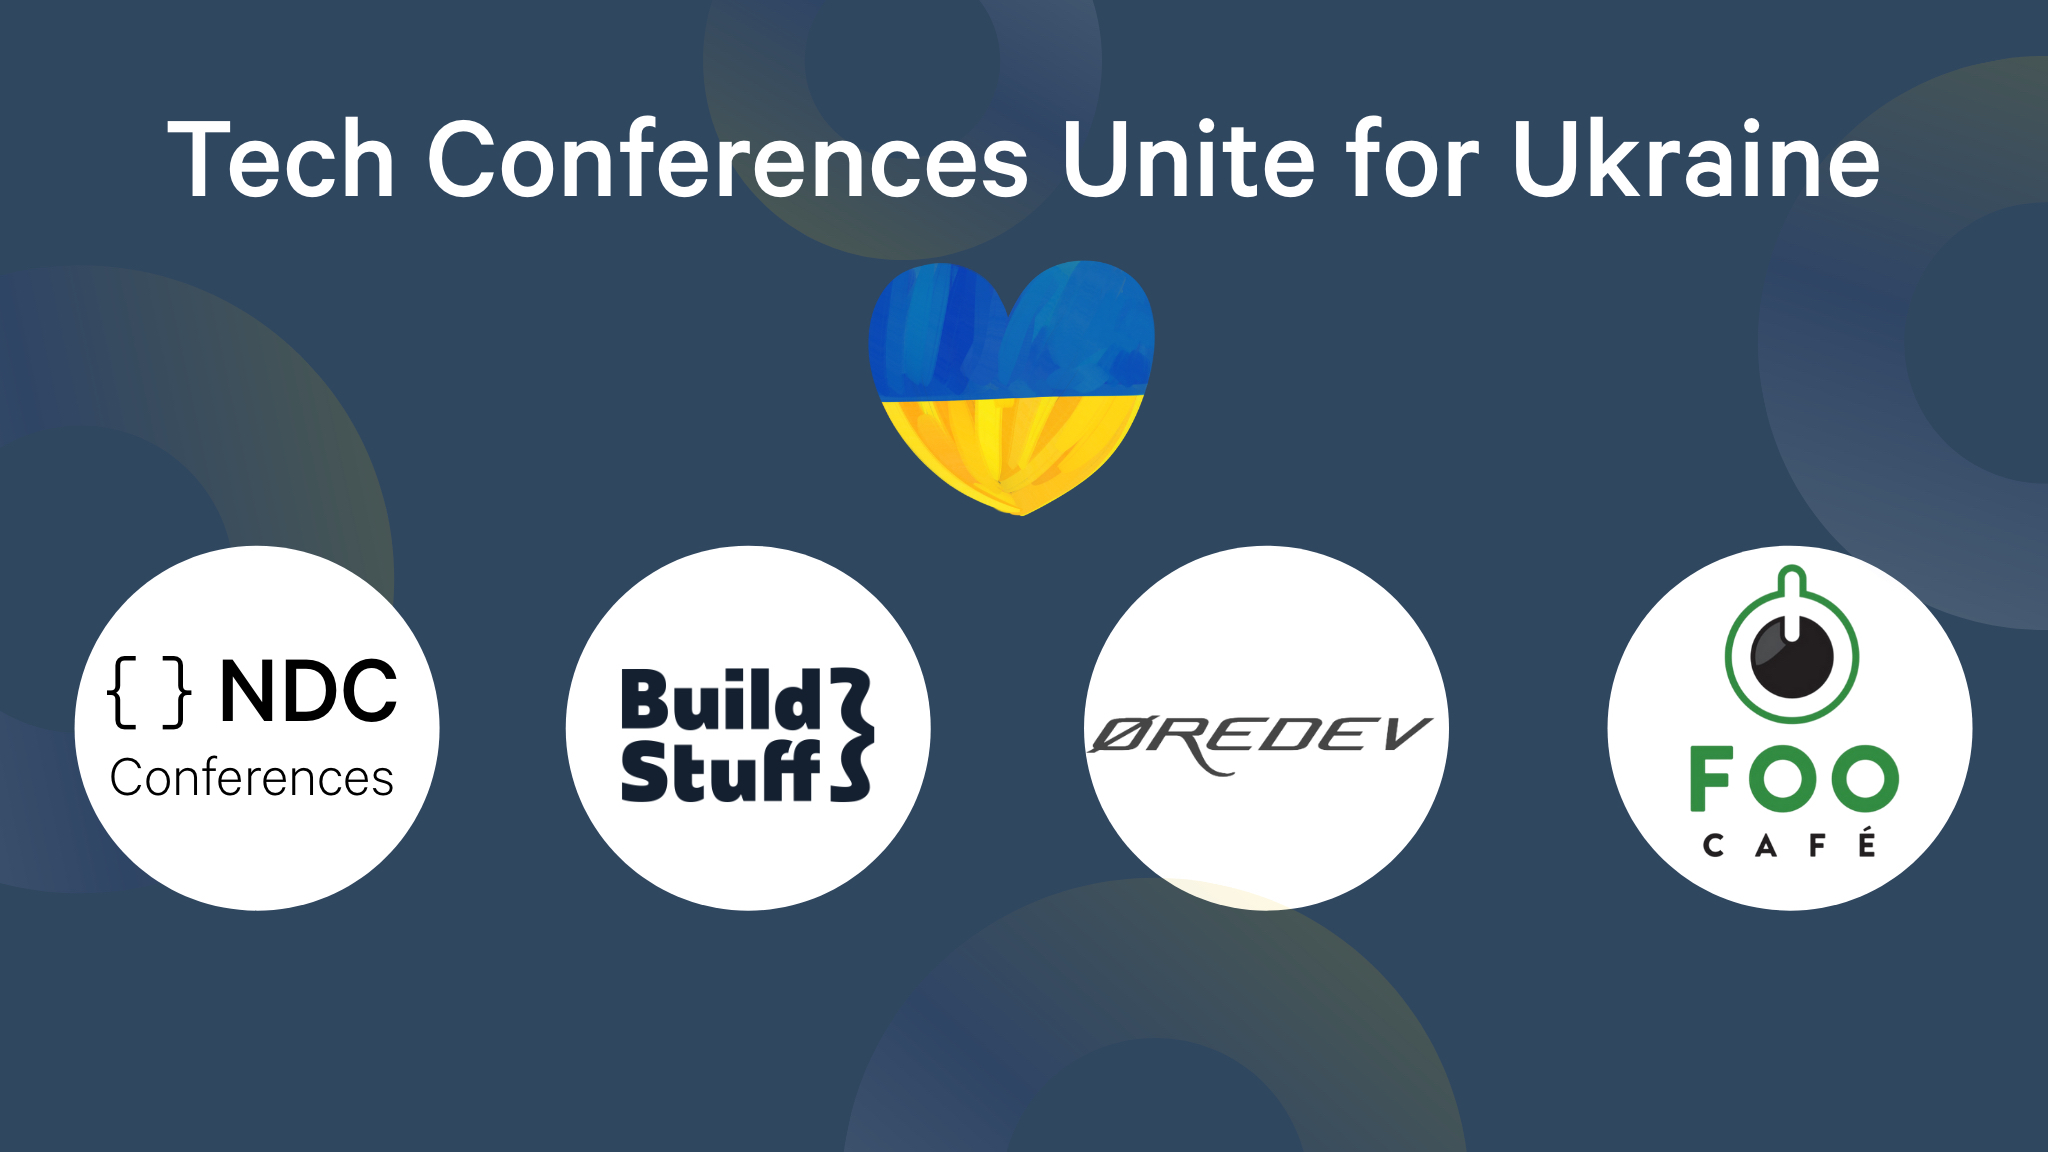 Banner showing a heart in the colours of the flag of Ukraine, and logos of NDC Conferences Øredev, Build Stuff, and FooCafe.